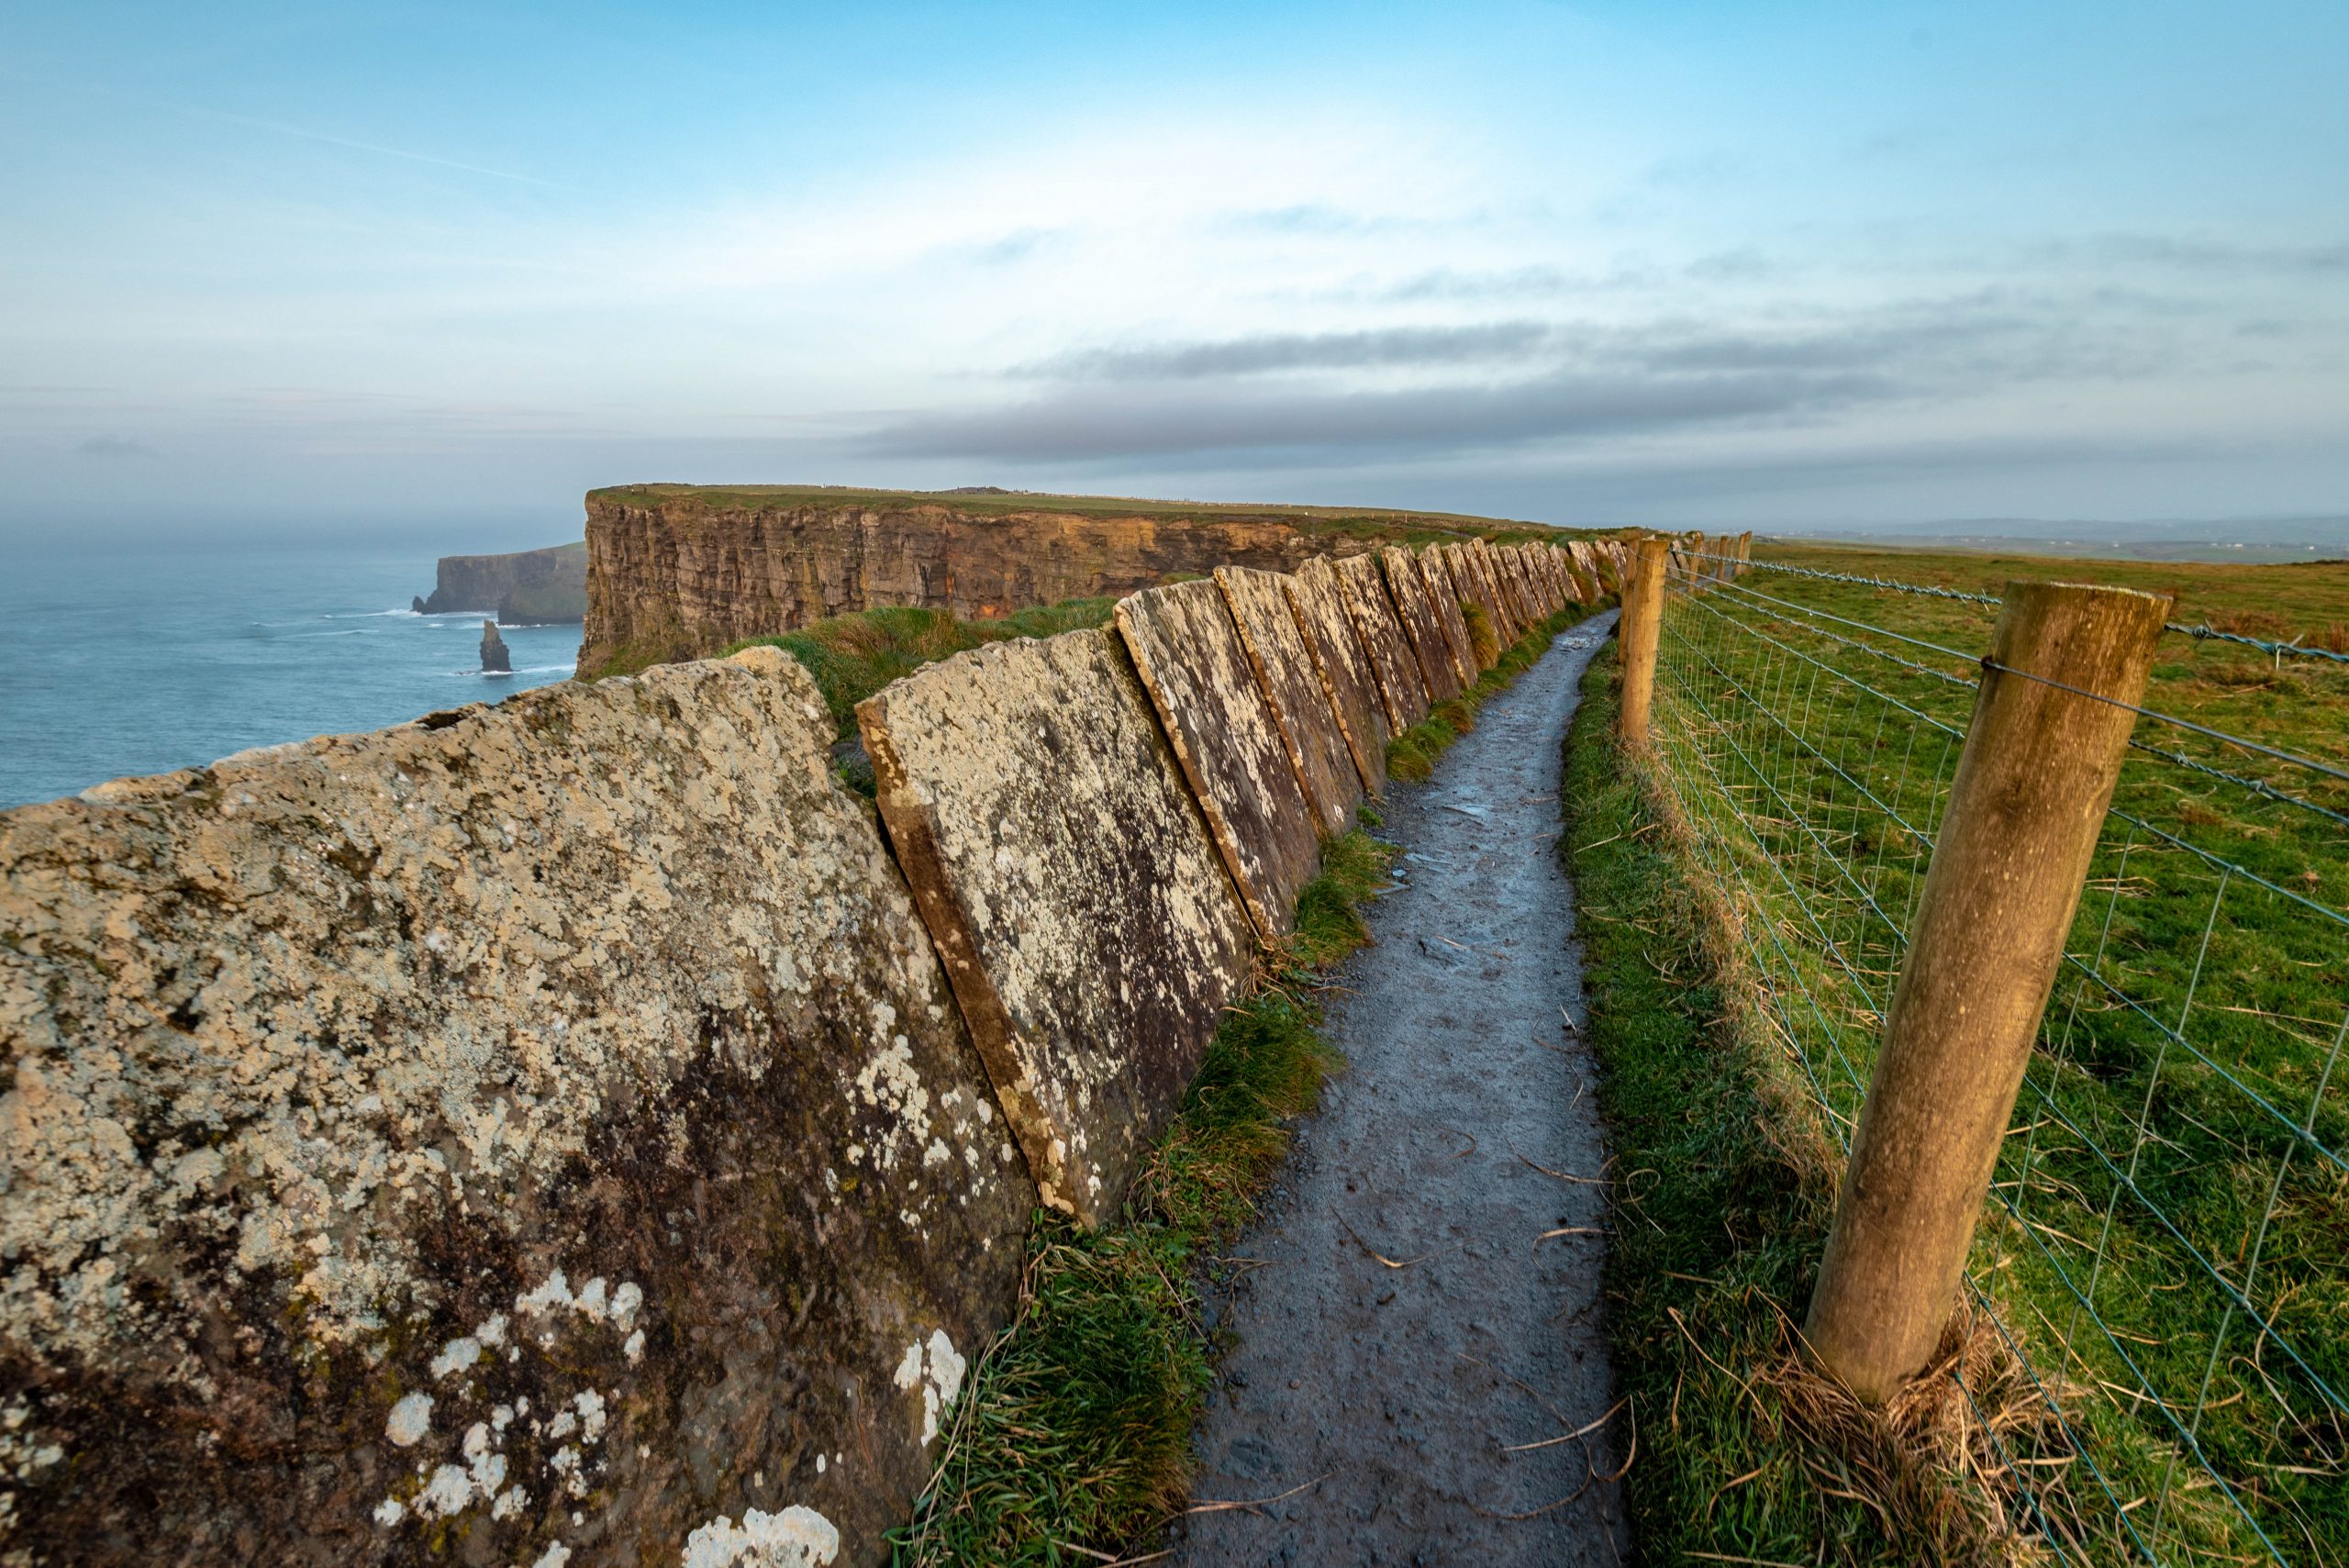 Trail at Cliffs of Moher